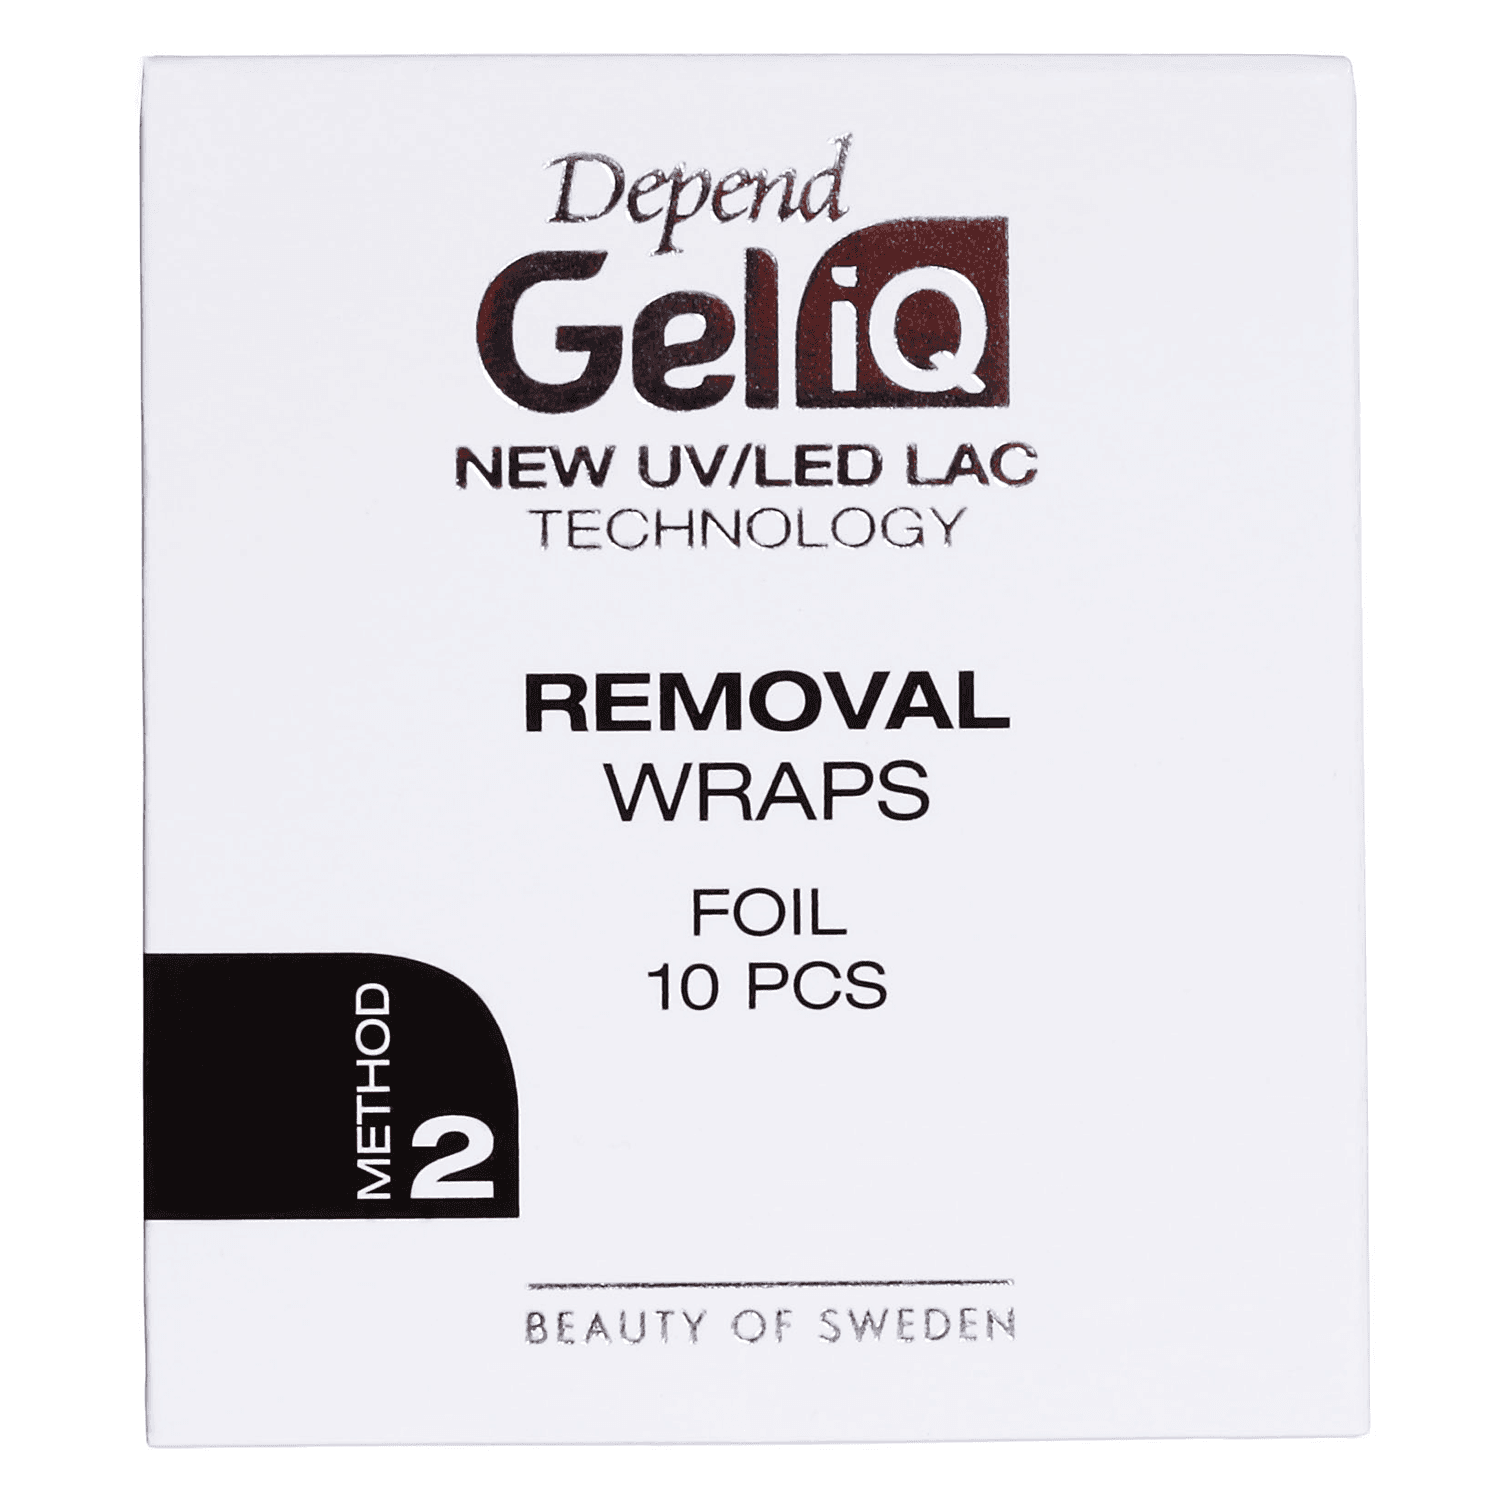 Gel iQ Cleanser & Remover - Removal Wraps Foil